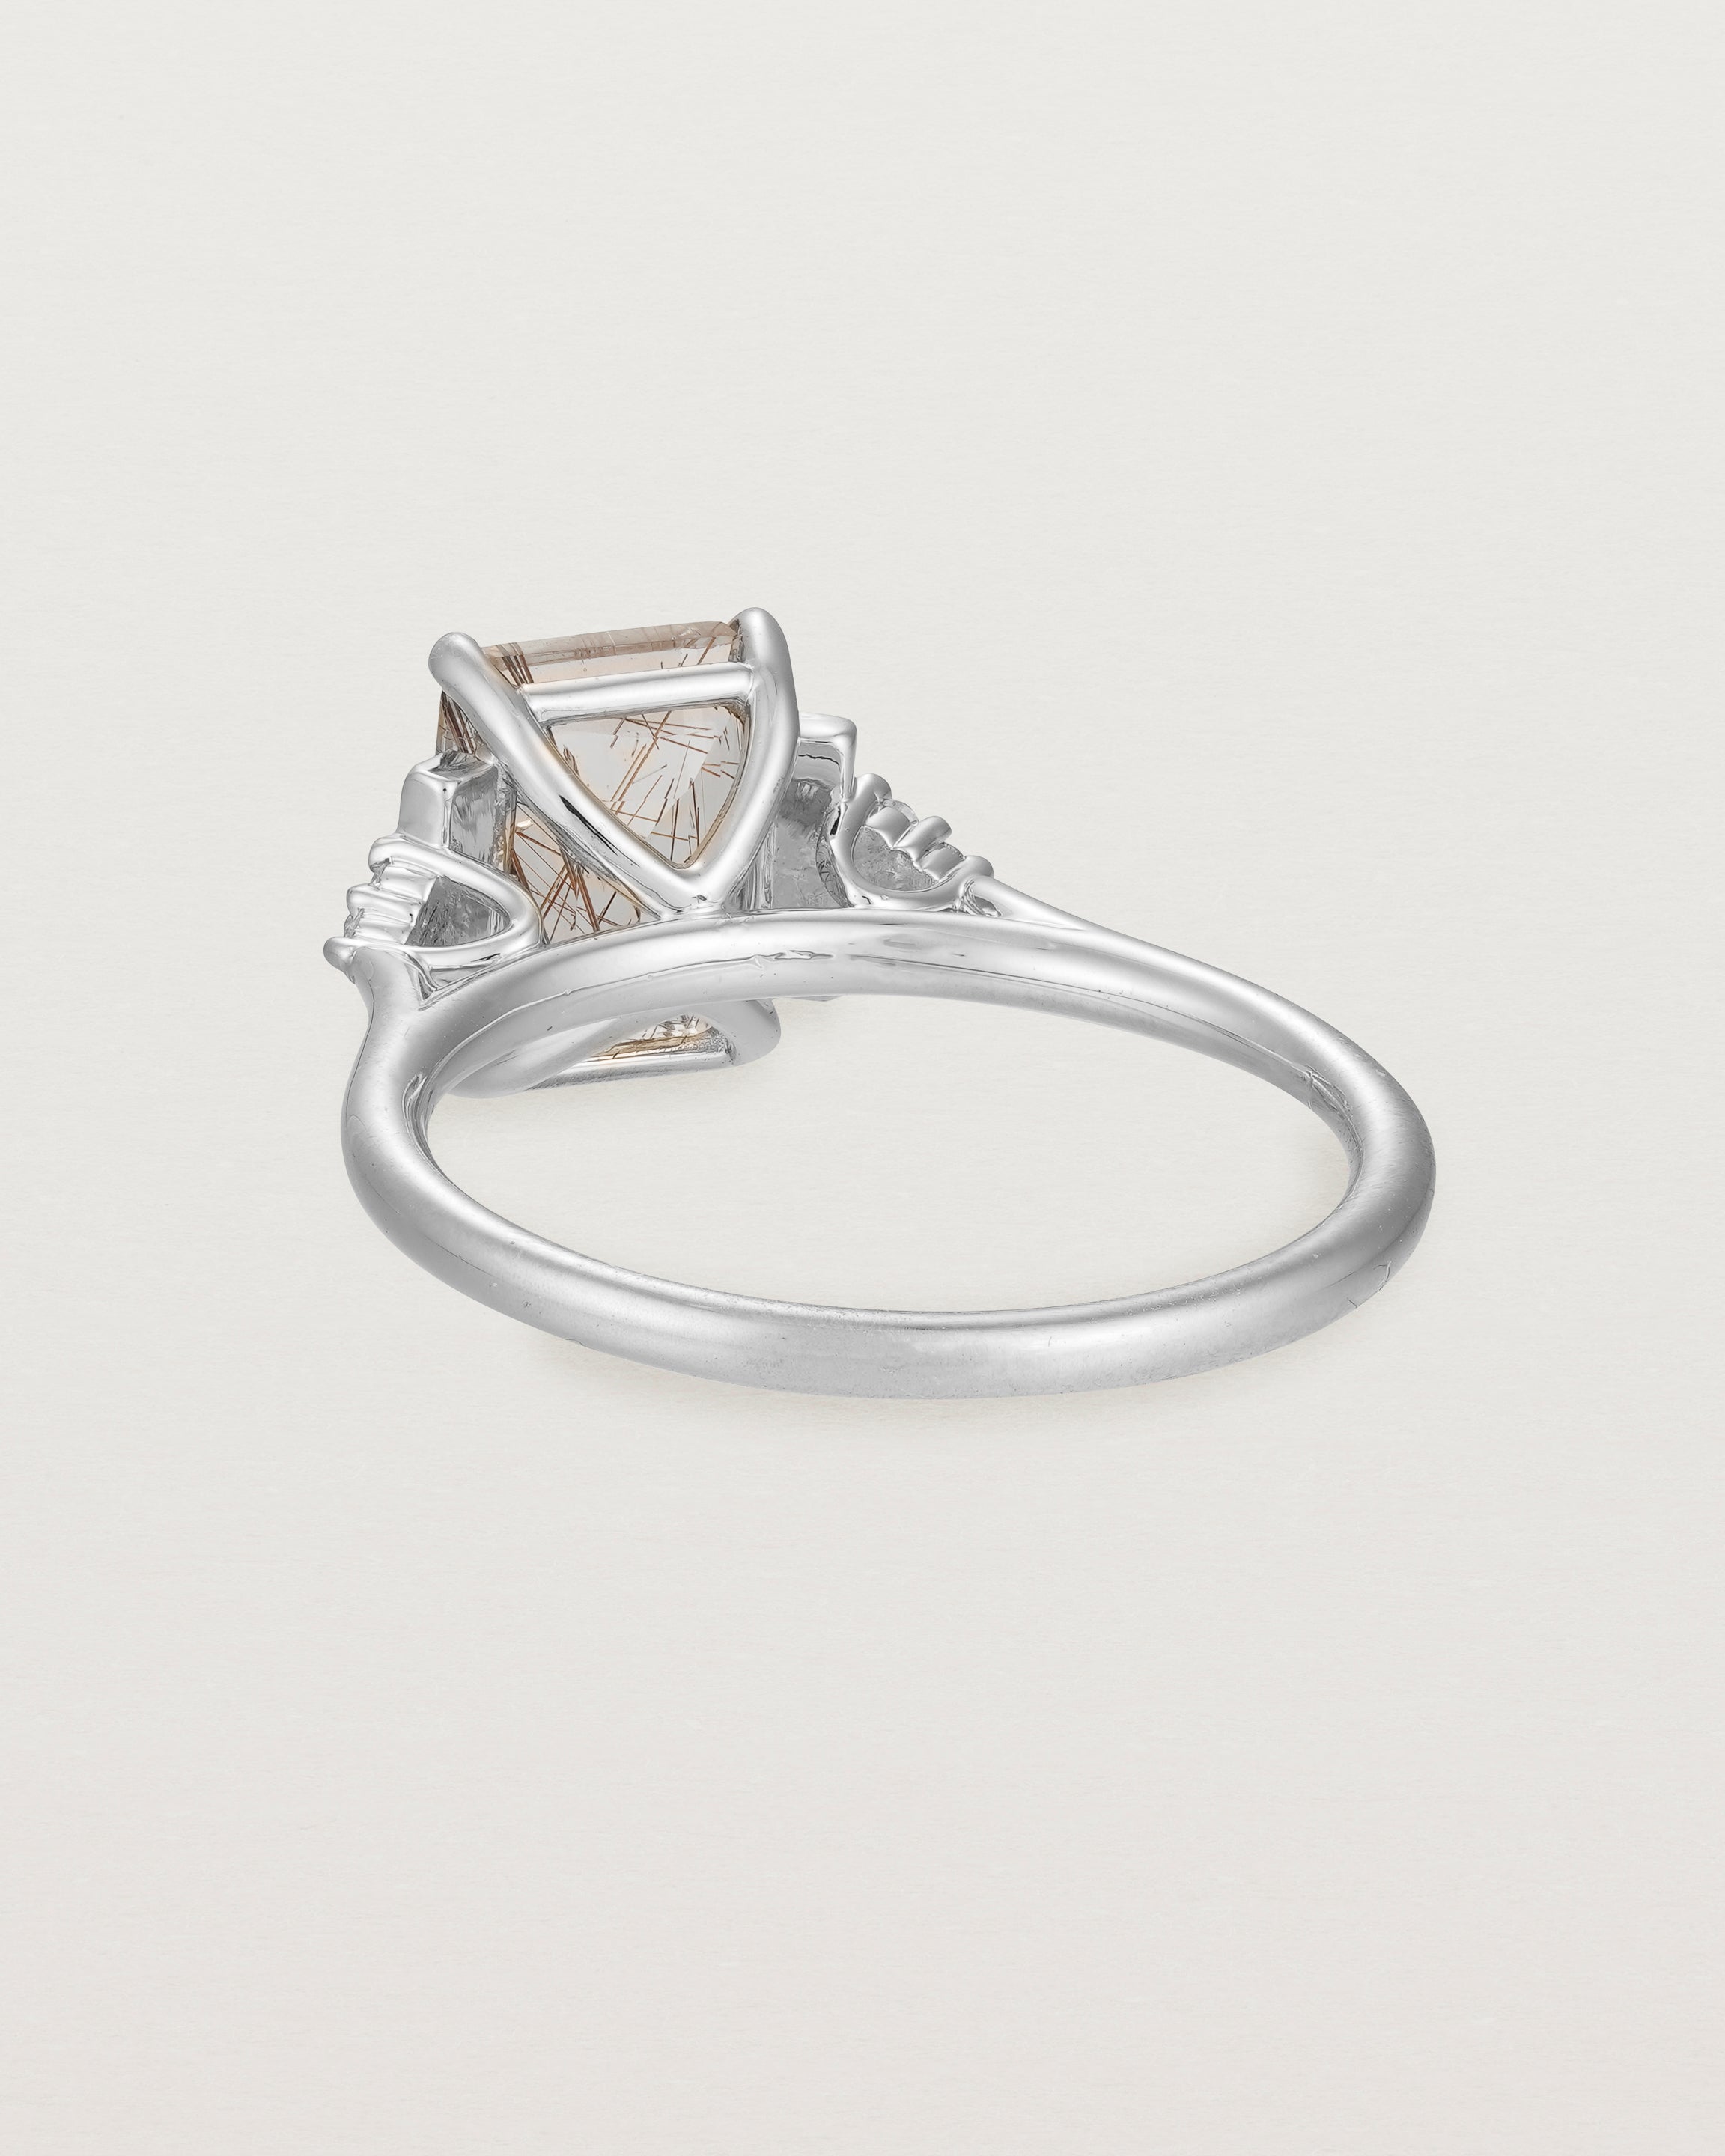 Back view of the Elodie Ring featuring a emerald cut rutilated quartz in white gold